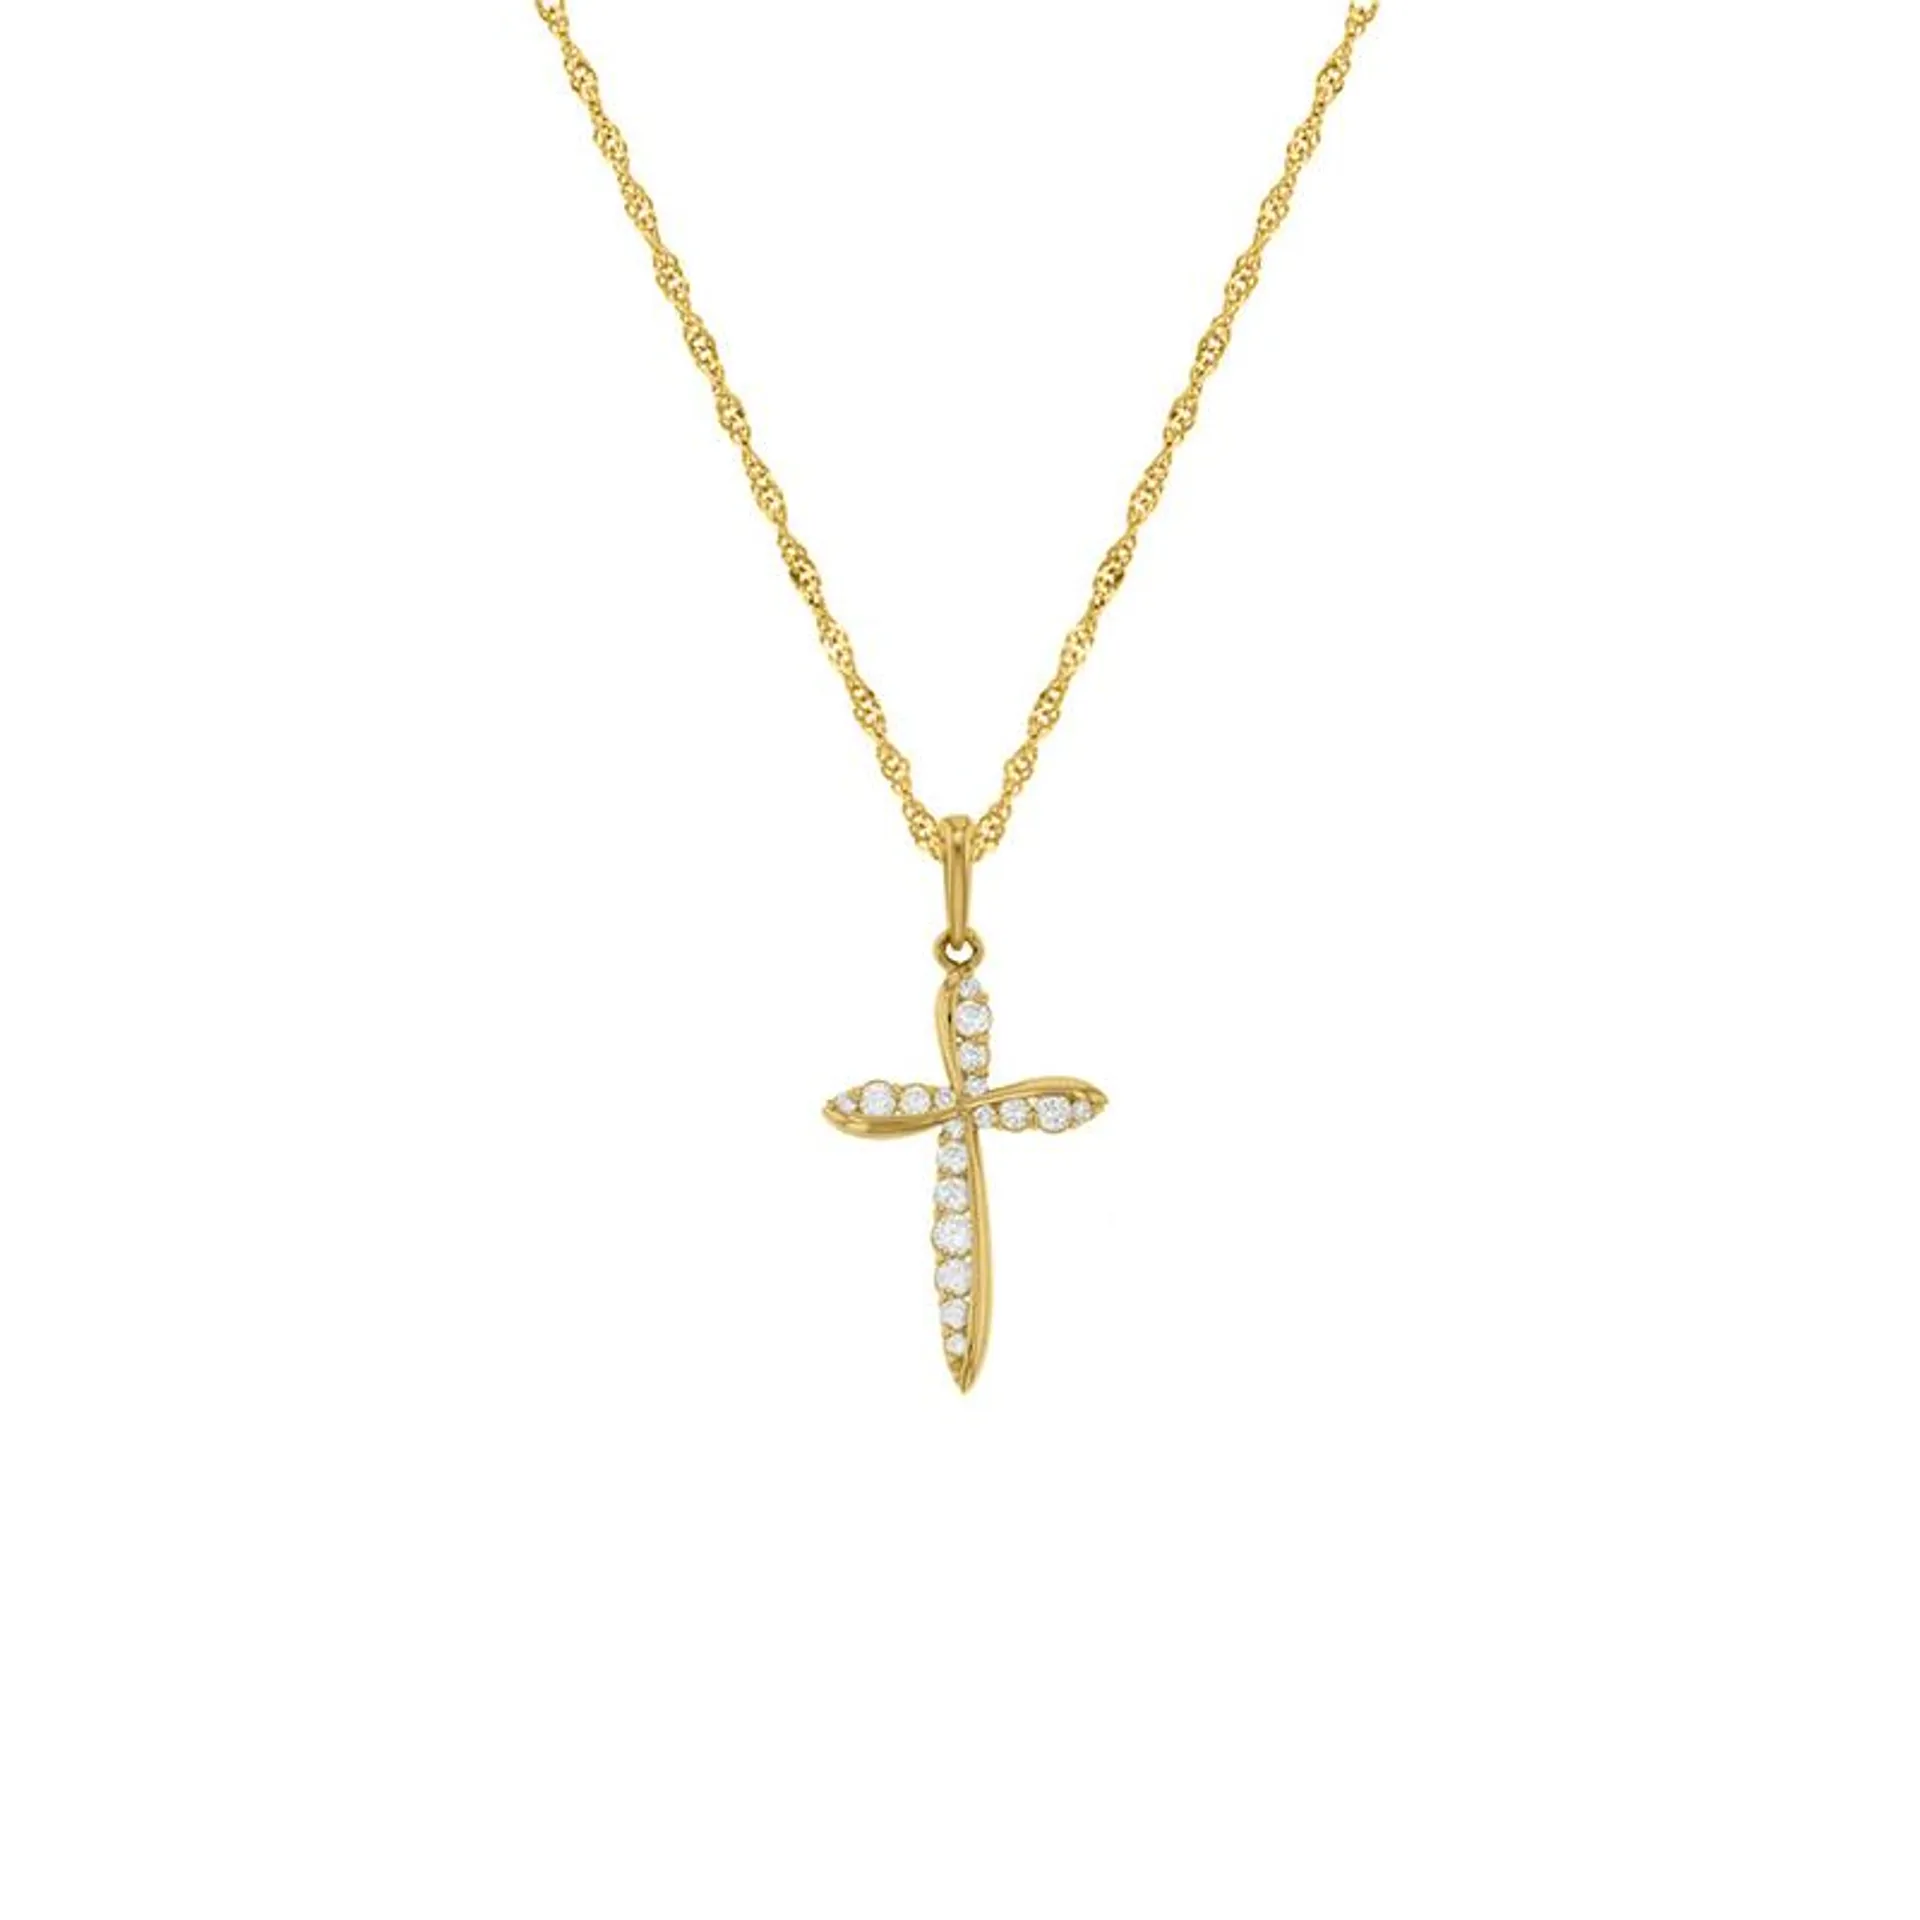 9ct Gold Swirl Cubic Zirconia Cross on a Silver/Gold Chain